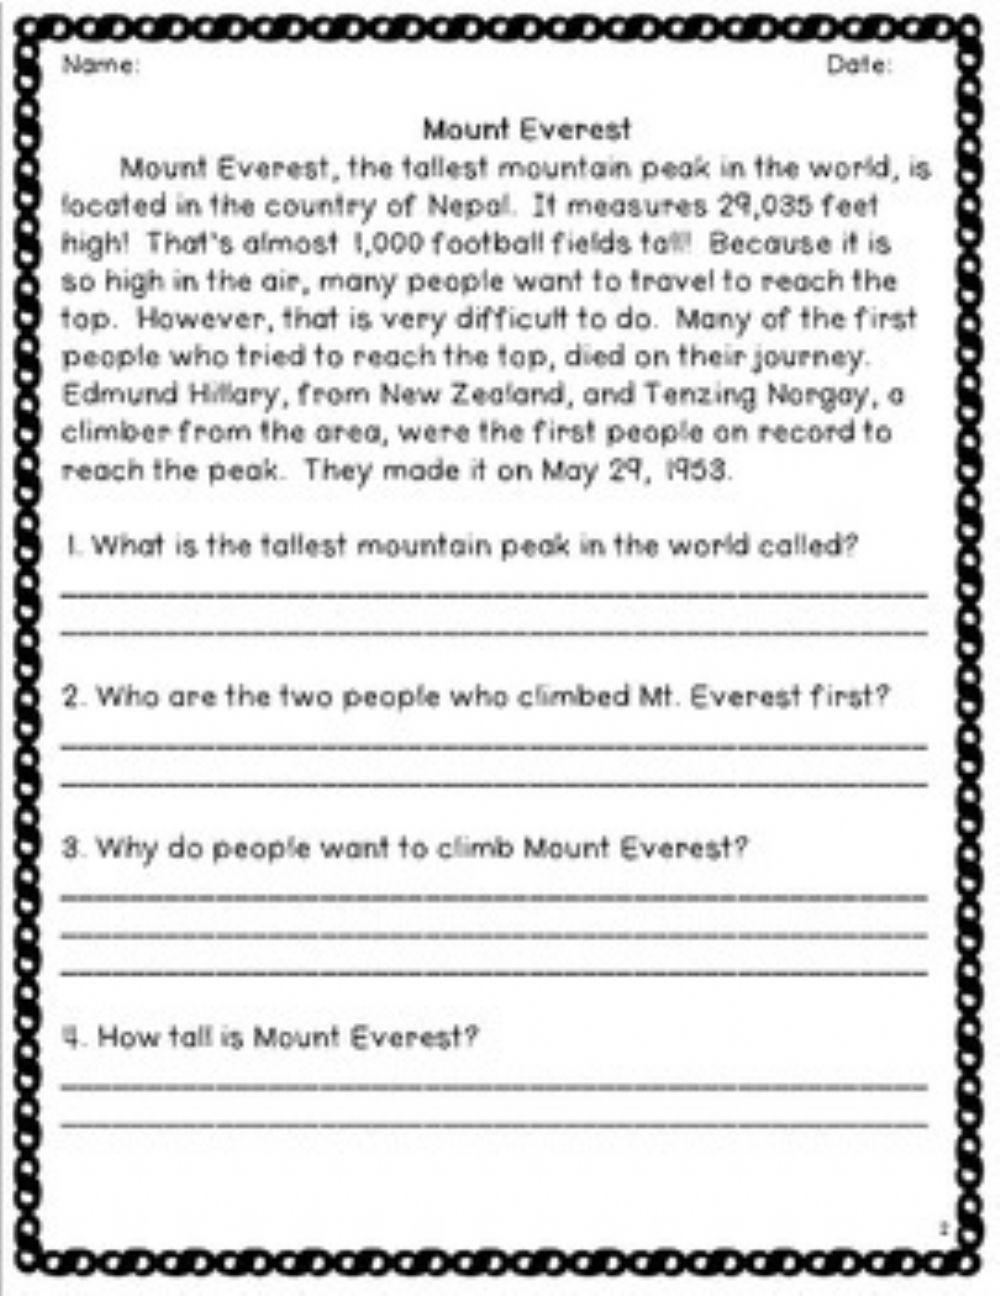 Exercise -1 (LIVEWORKSHEETS)- Reading Comprehension with open-ended questions